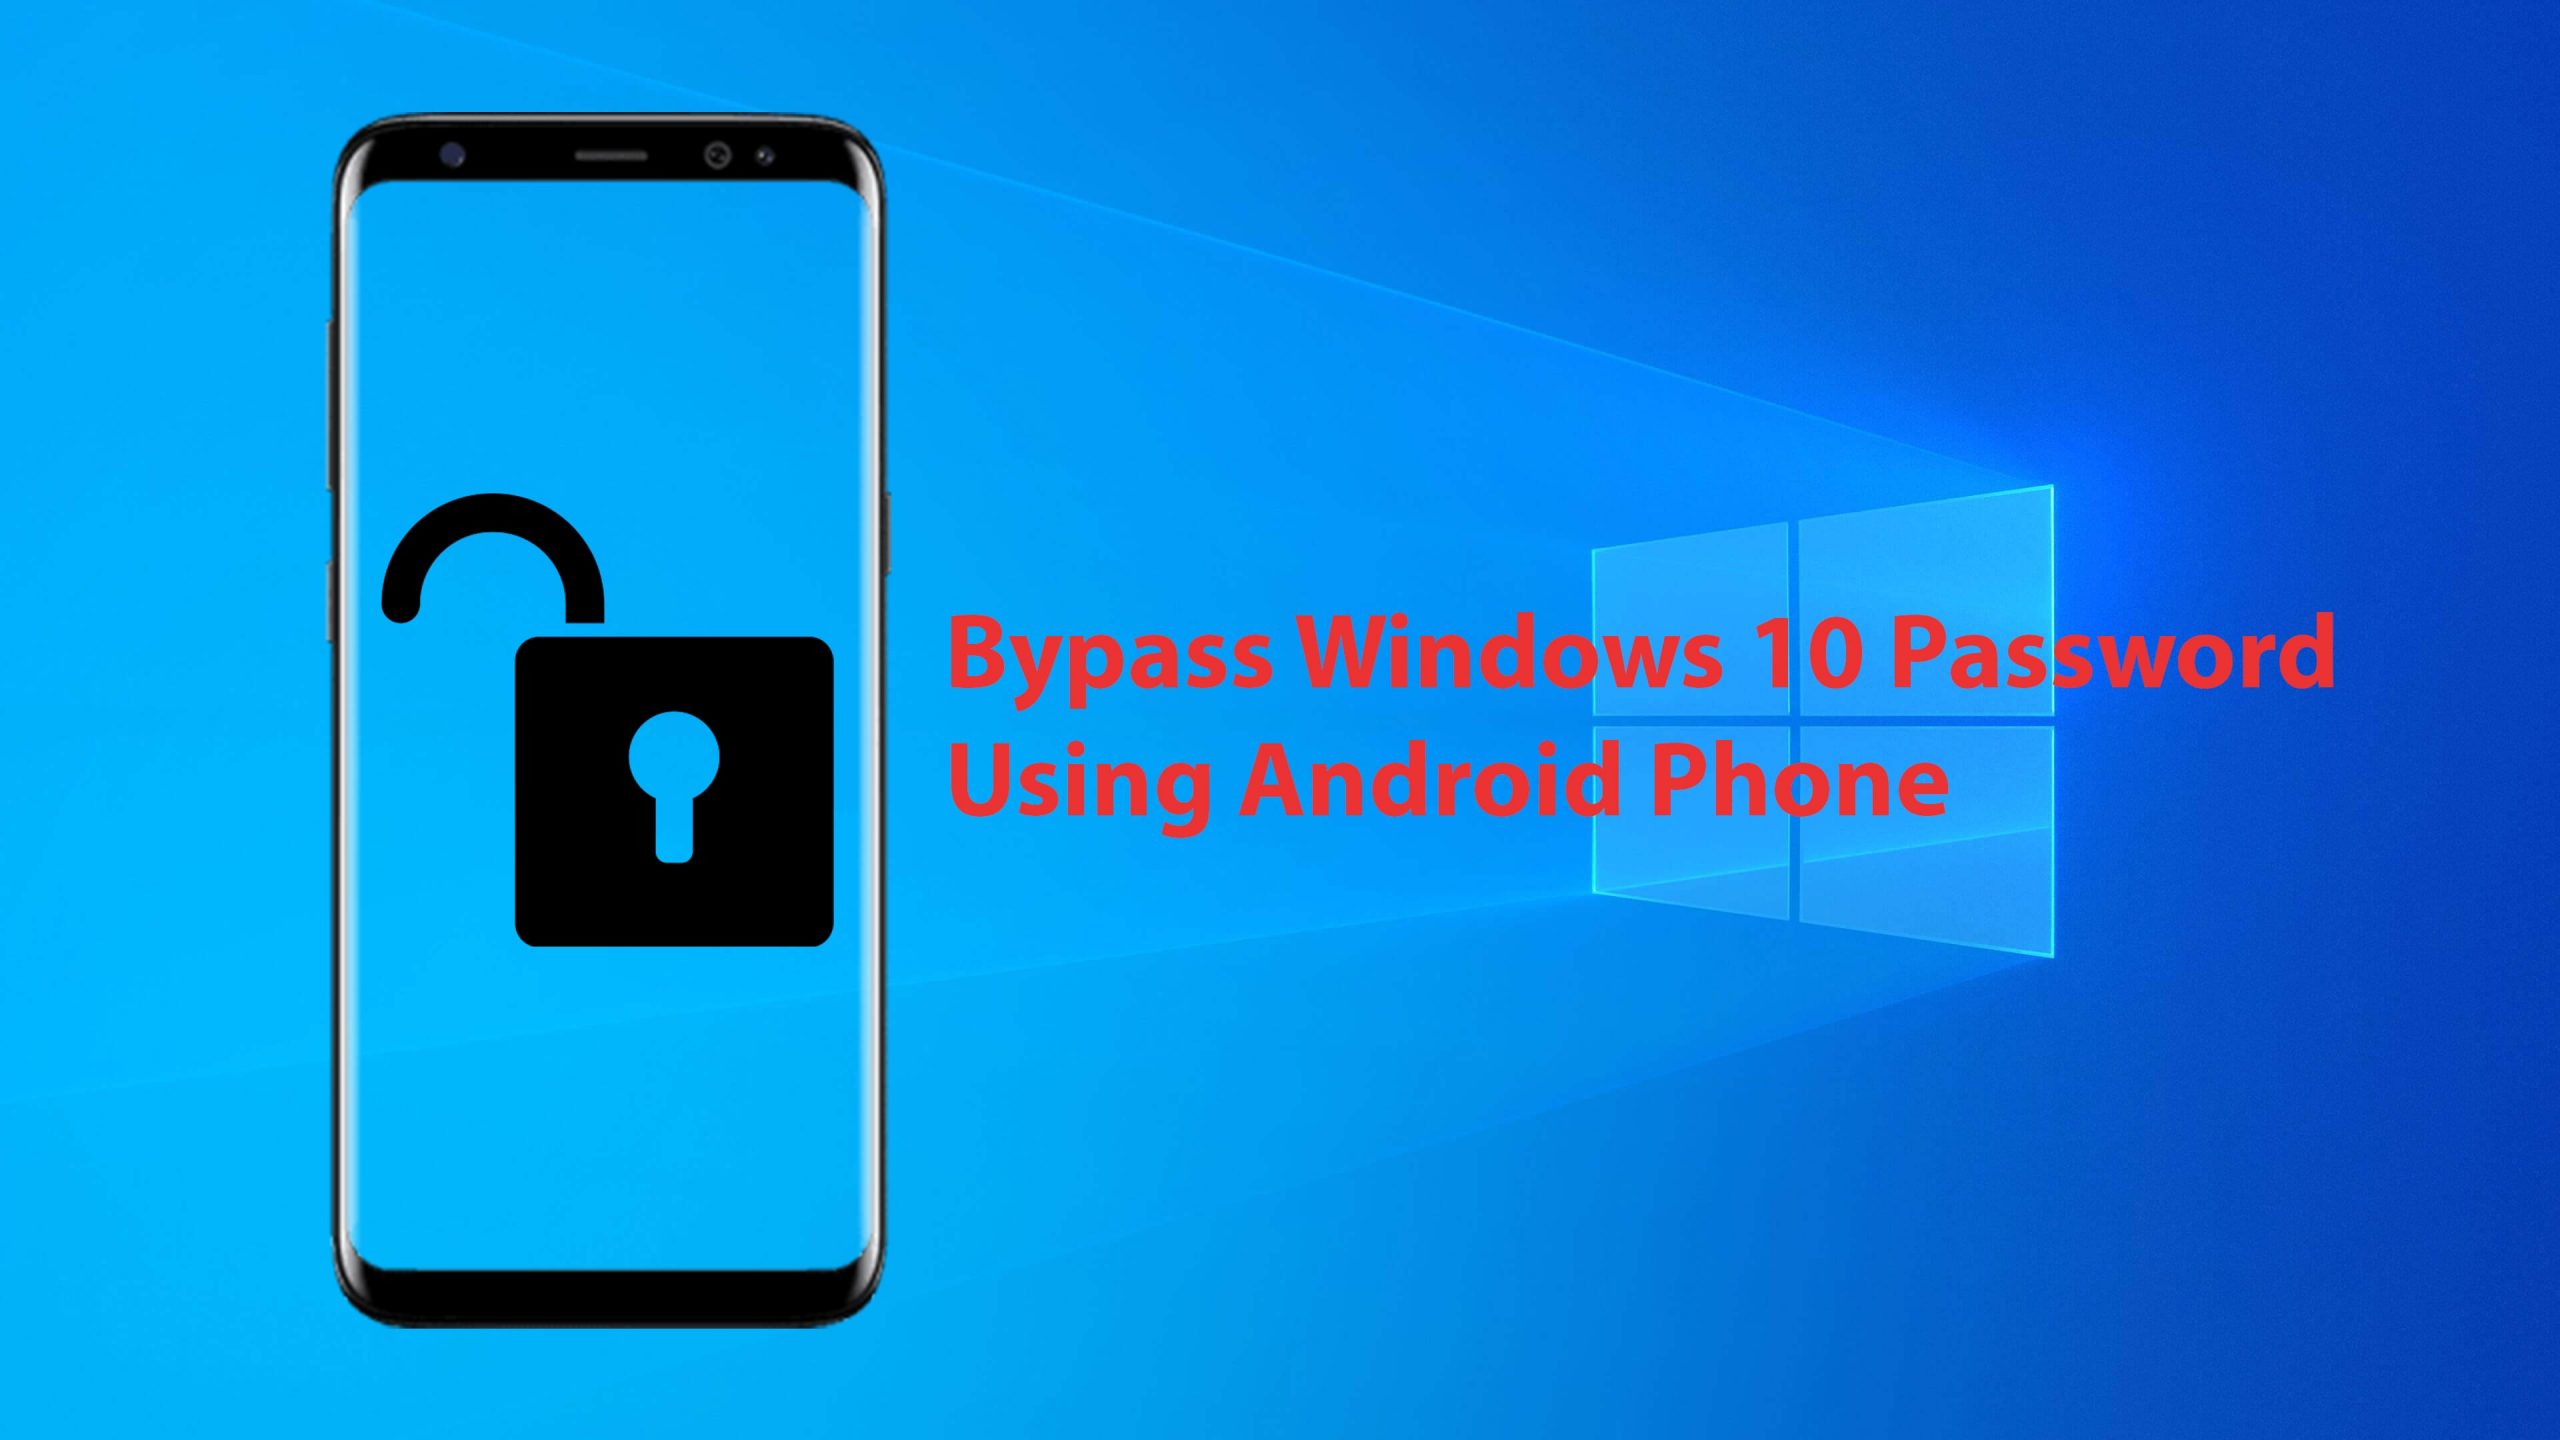 How To Bypass Windows 10 Password Using Android Phone?